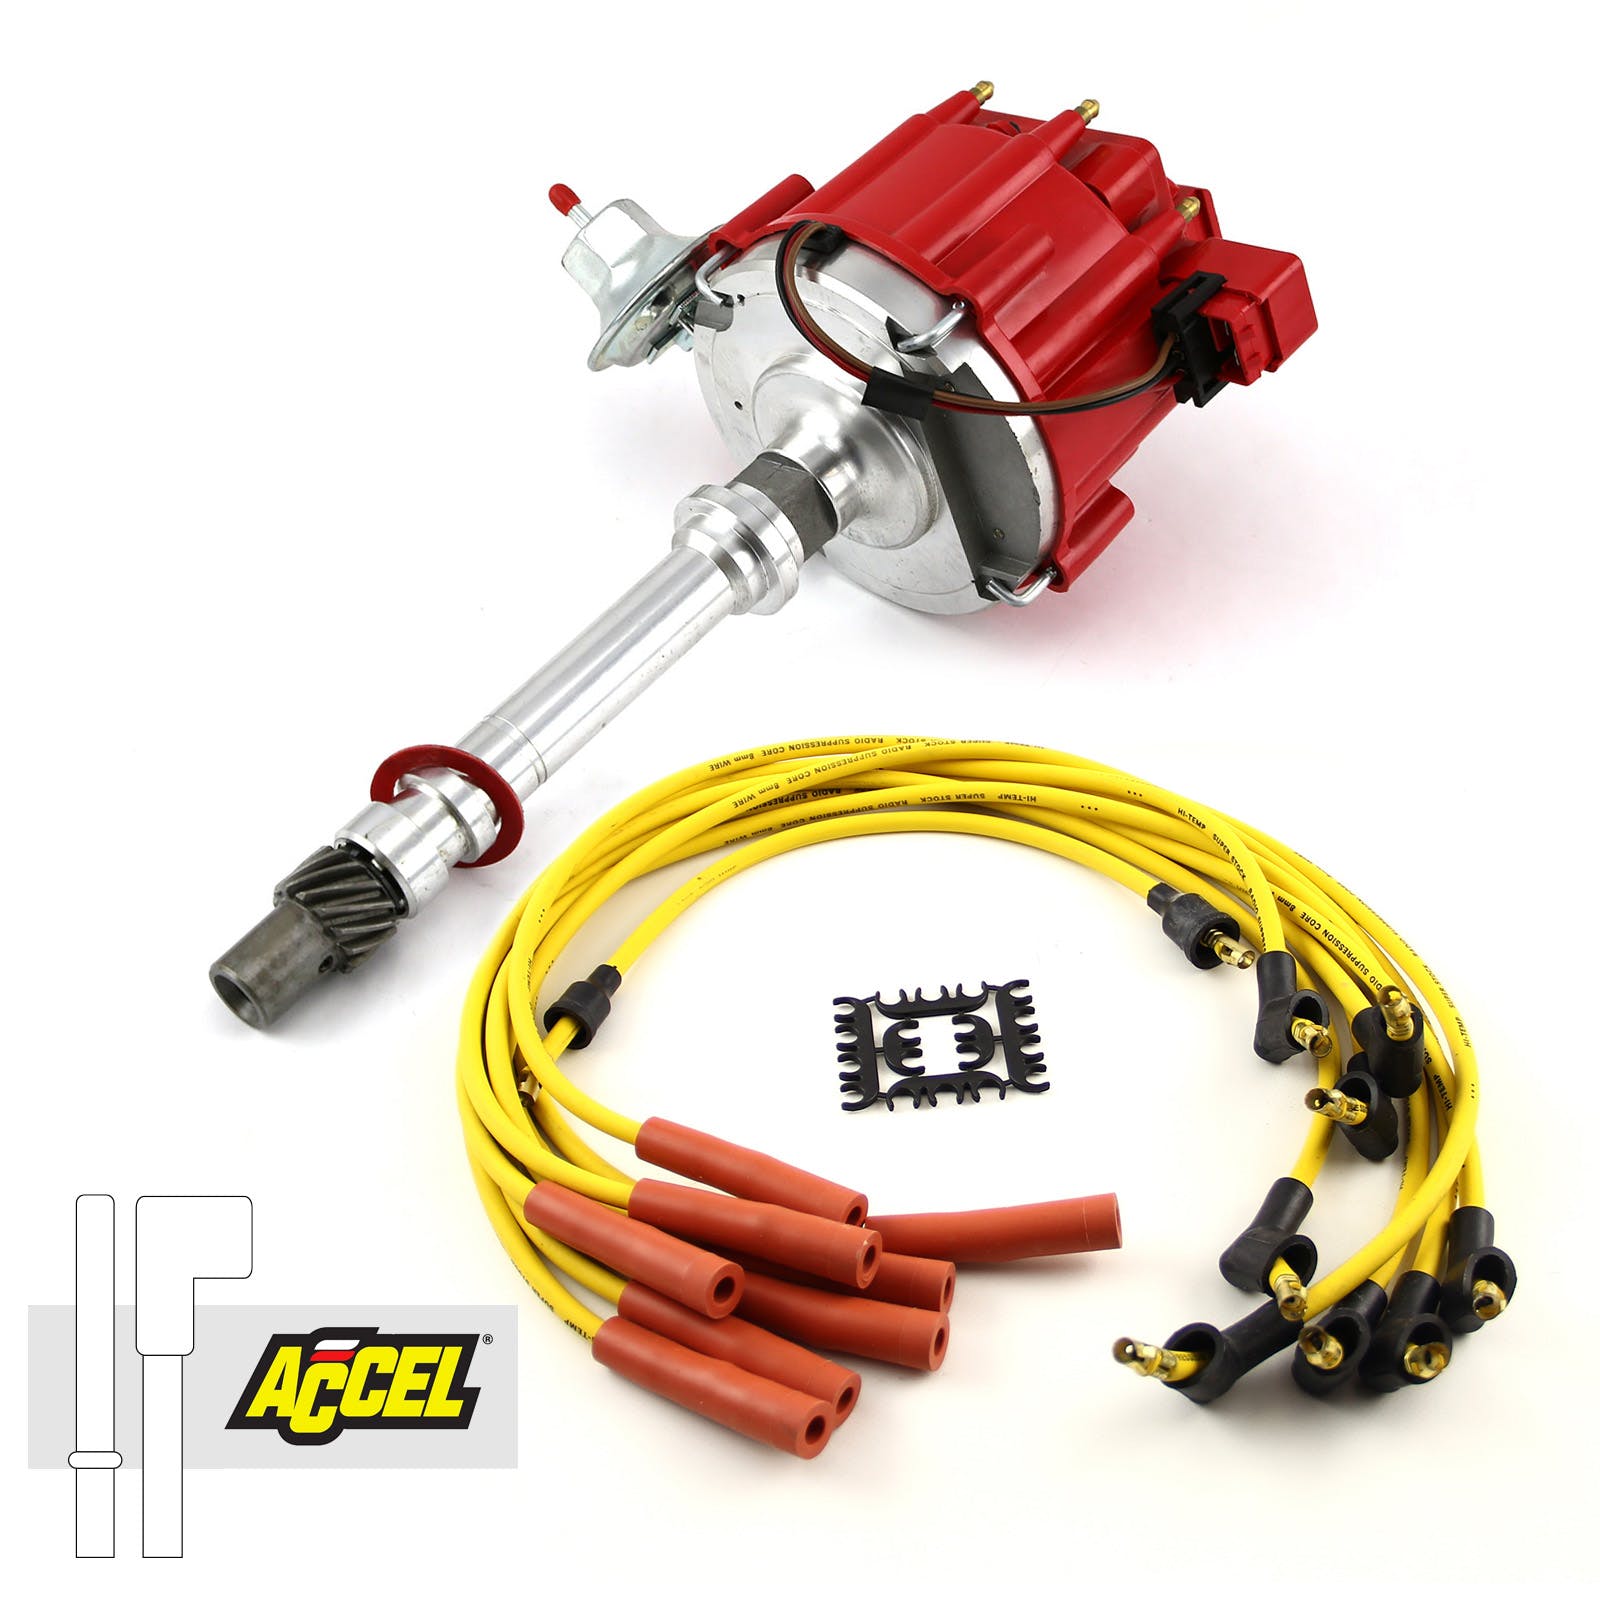 Speedmaster PCE385.1036 HEI Distributor Accel Spark Plug Wires Ignition Combo Kit